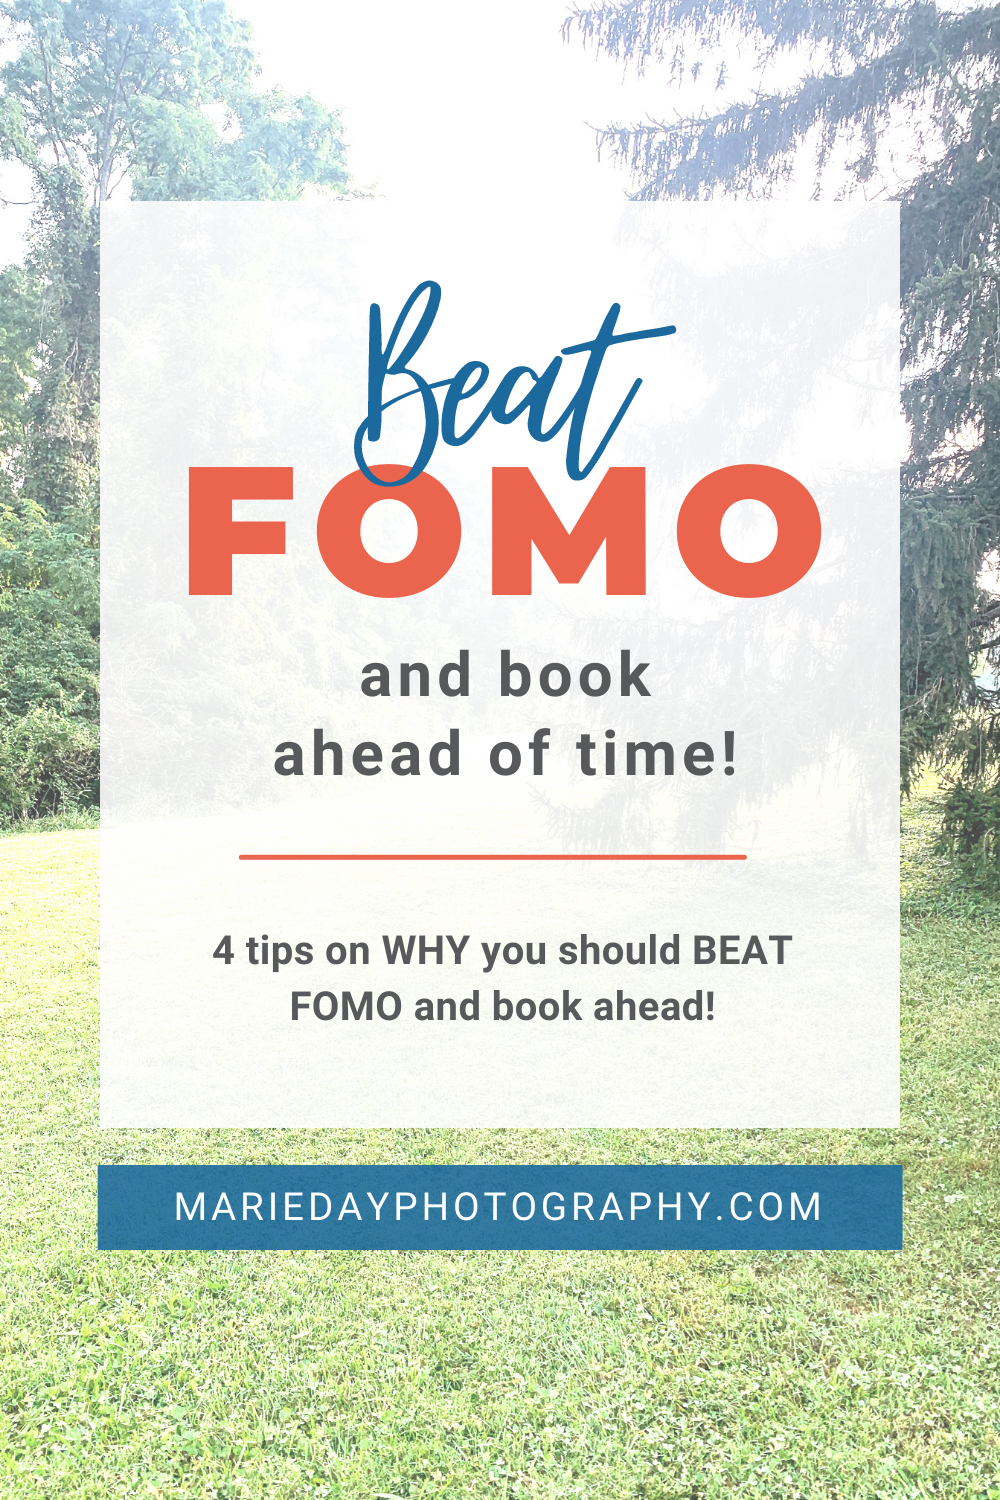 Beat FOMO and book ahead!